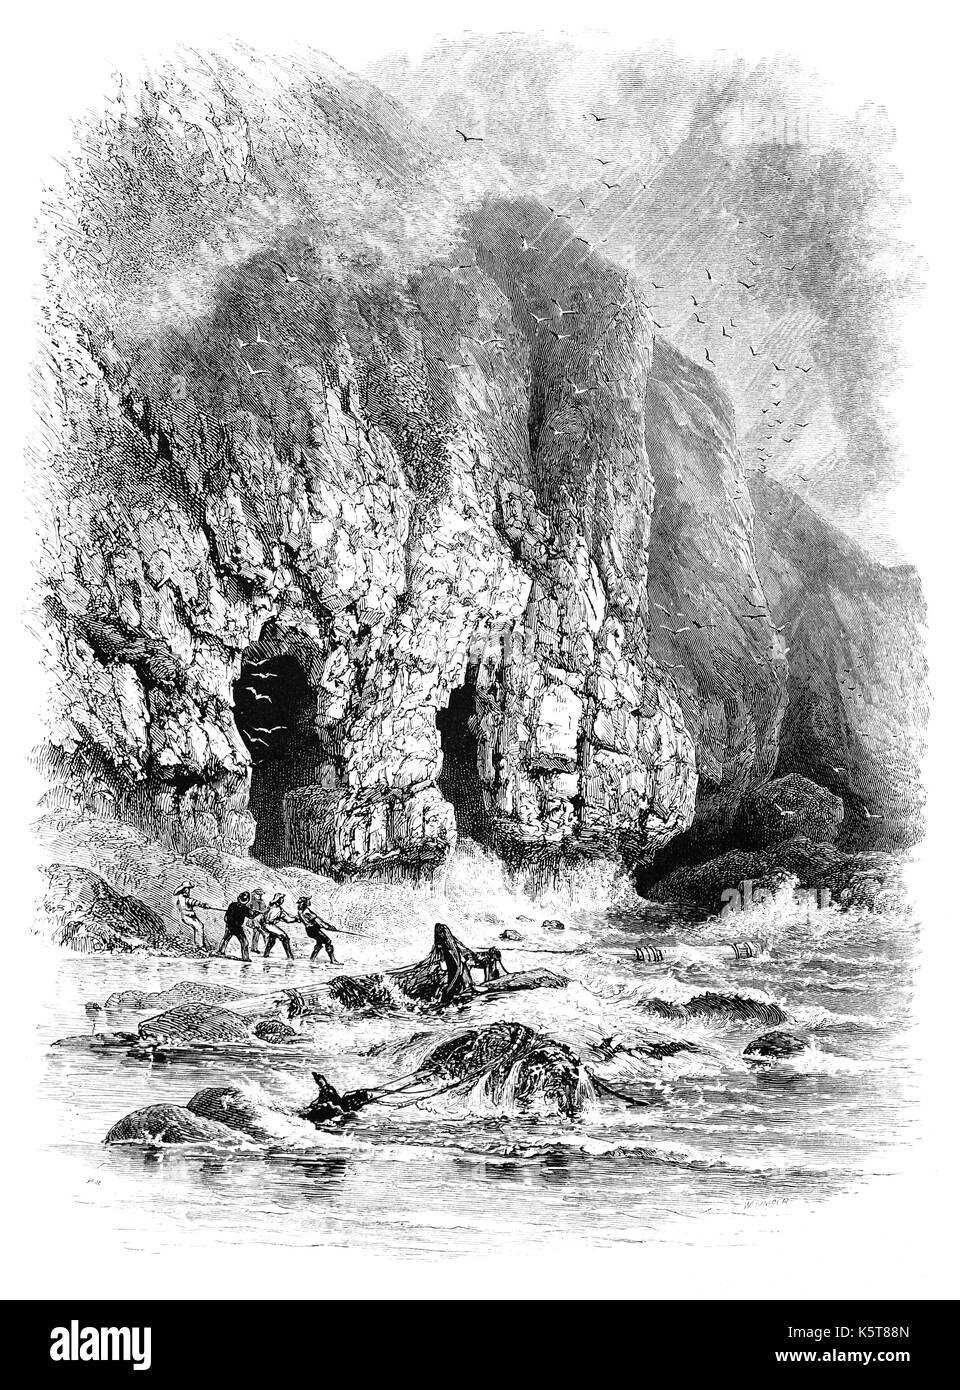 1870: Locals salvaging wreckage from a shipwreck on the shingly beach of Skrinkle Haven, between Old Castle Head and Lydstep Point. It lies south-east of Manorbier village, Pembrokeshire, South Wales. Stock Photo